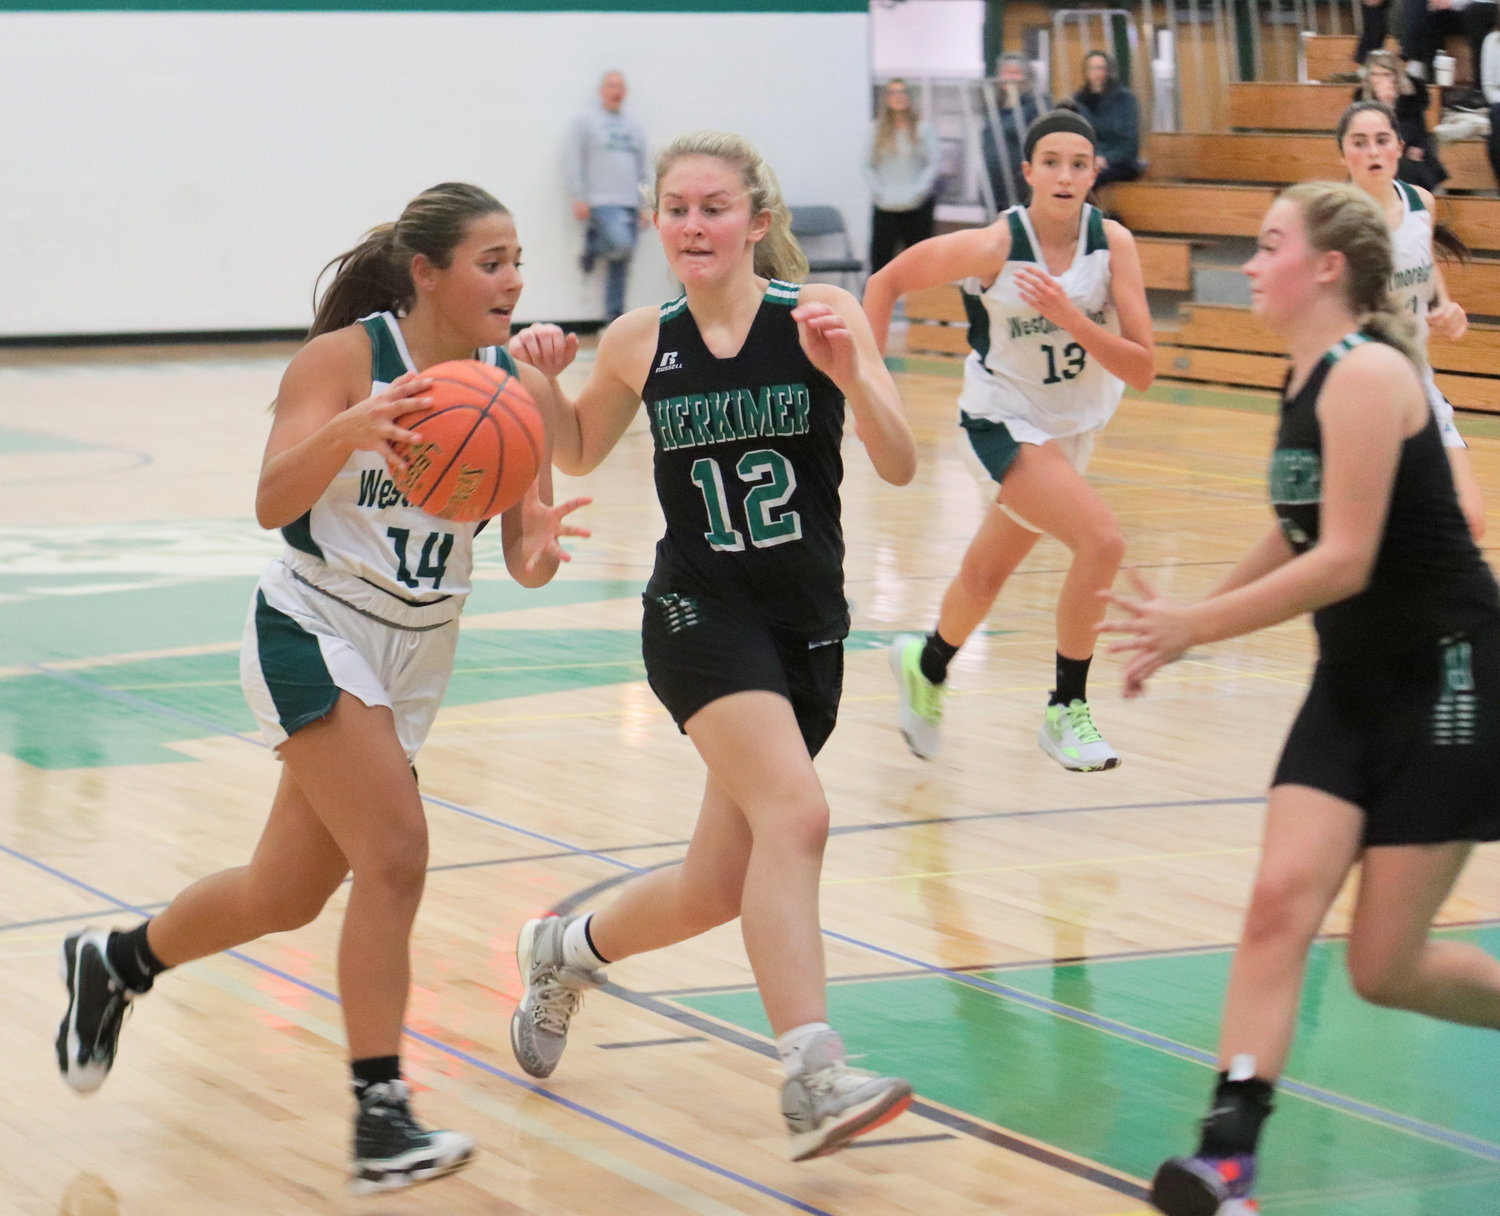 Westmoreland's Olivia Moore tries to make a move against visiting Herkimer on Wednesday.